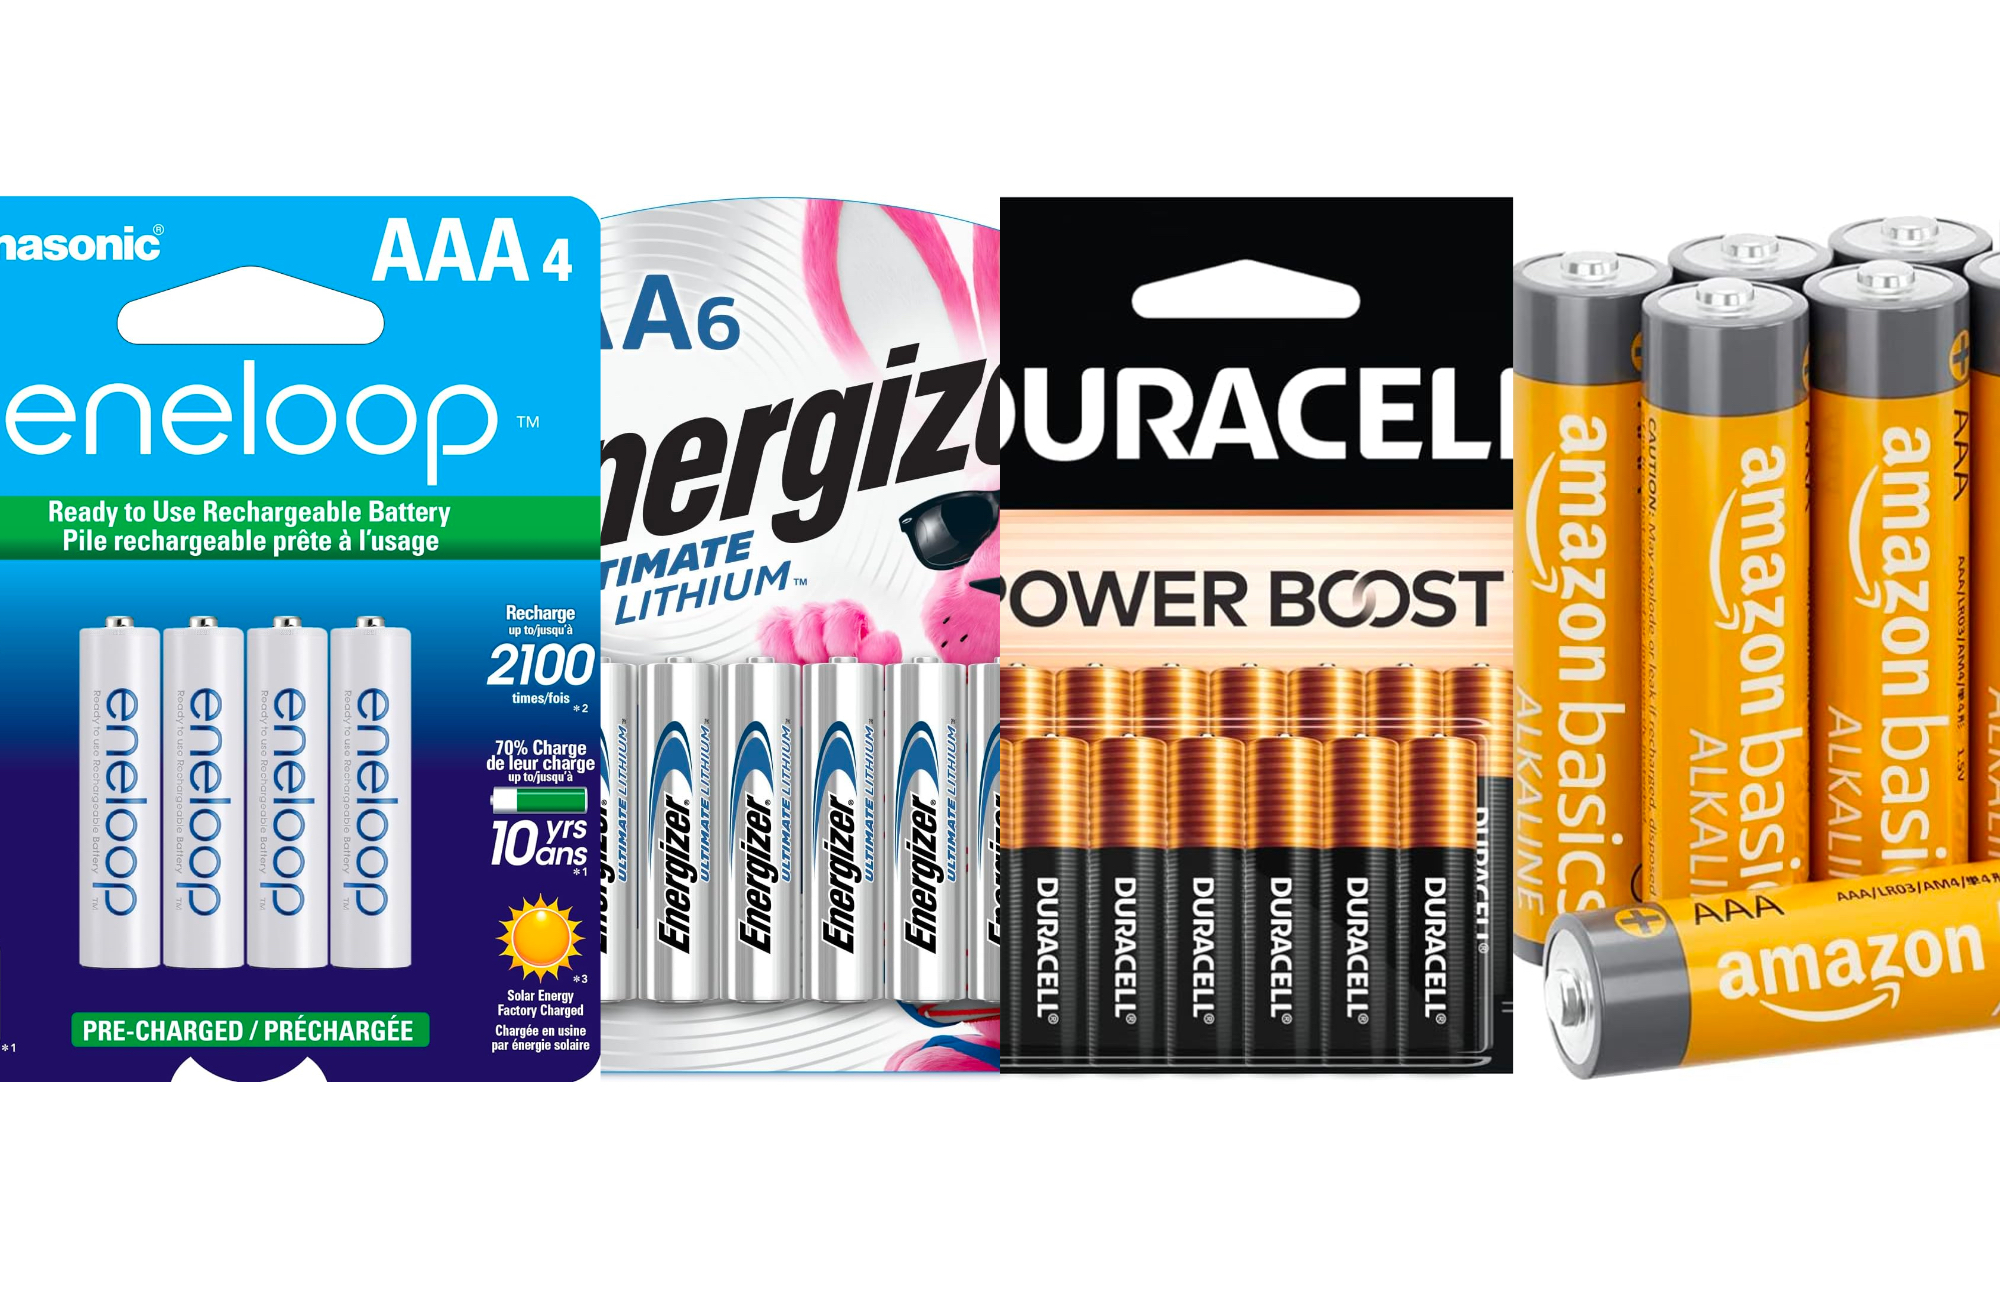 Rechargeable AAA Batteries 750mAh - Duracell Plus Batteries